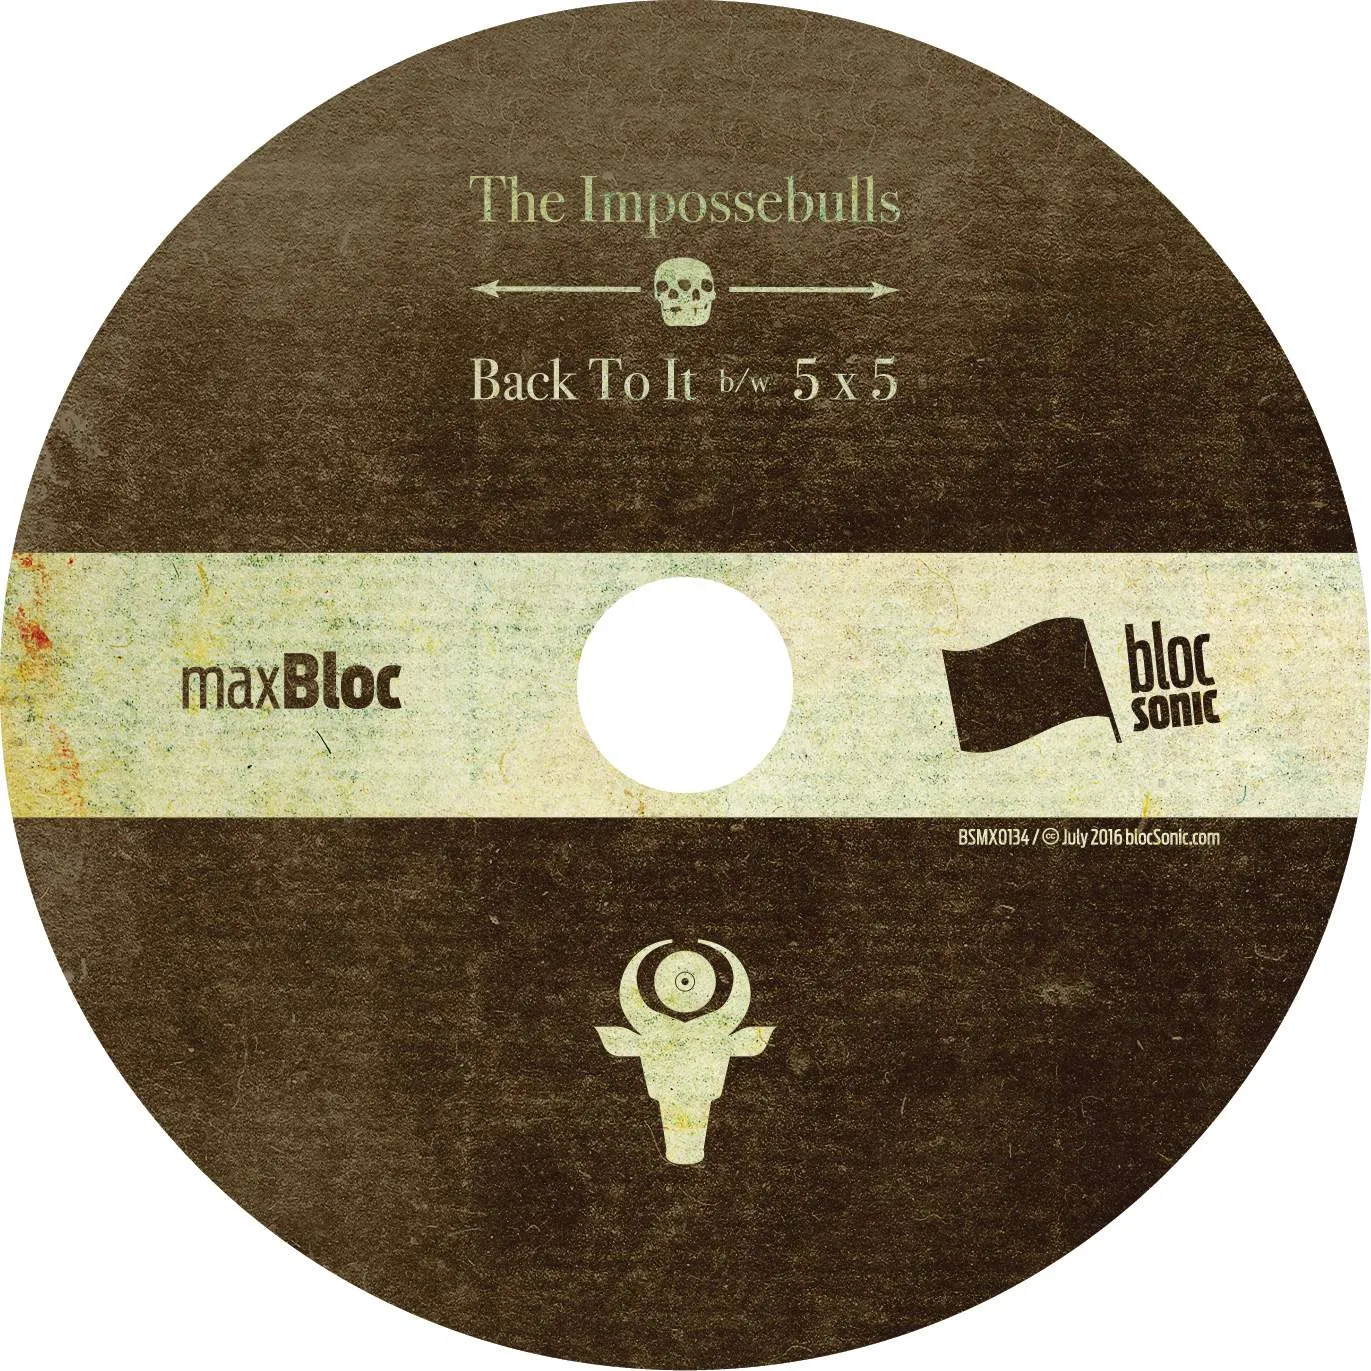 Album disc for “Back To It b/w 5 x 5” by The Impossebulls